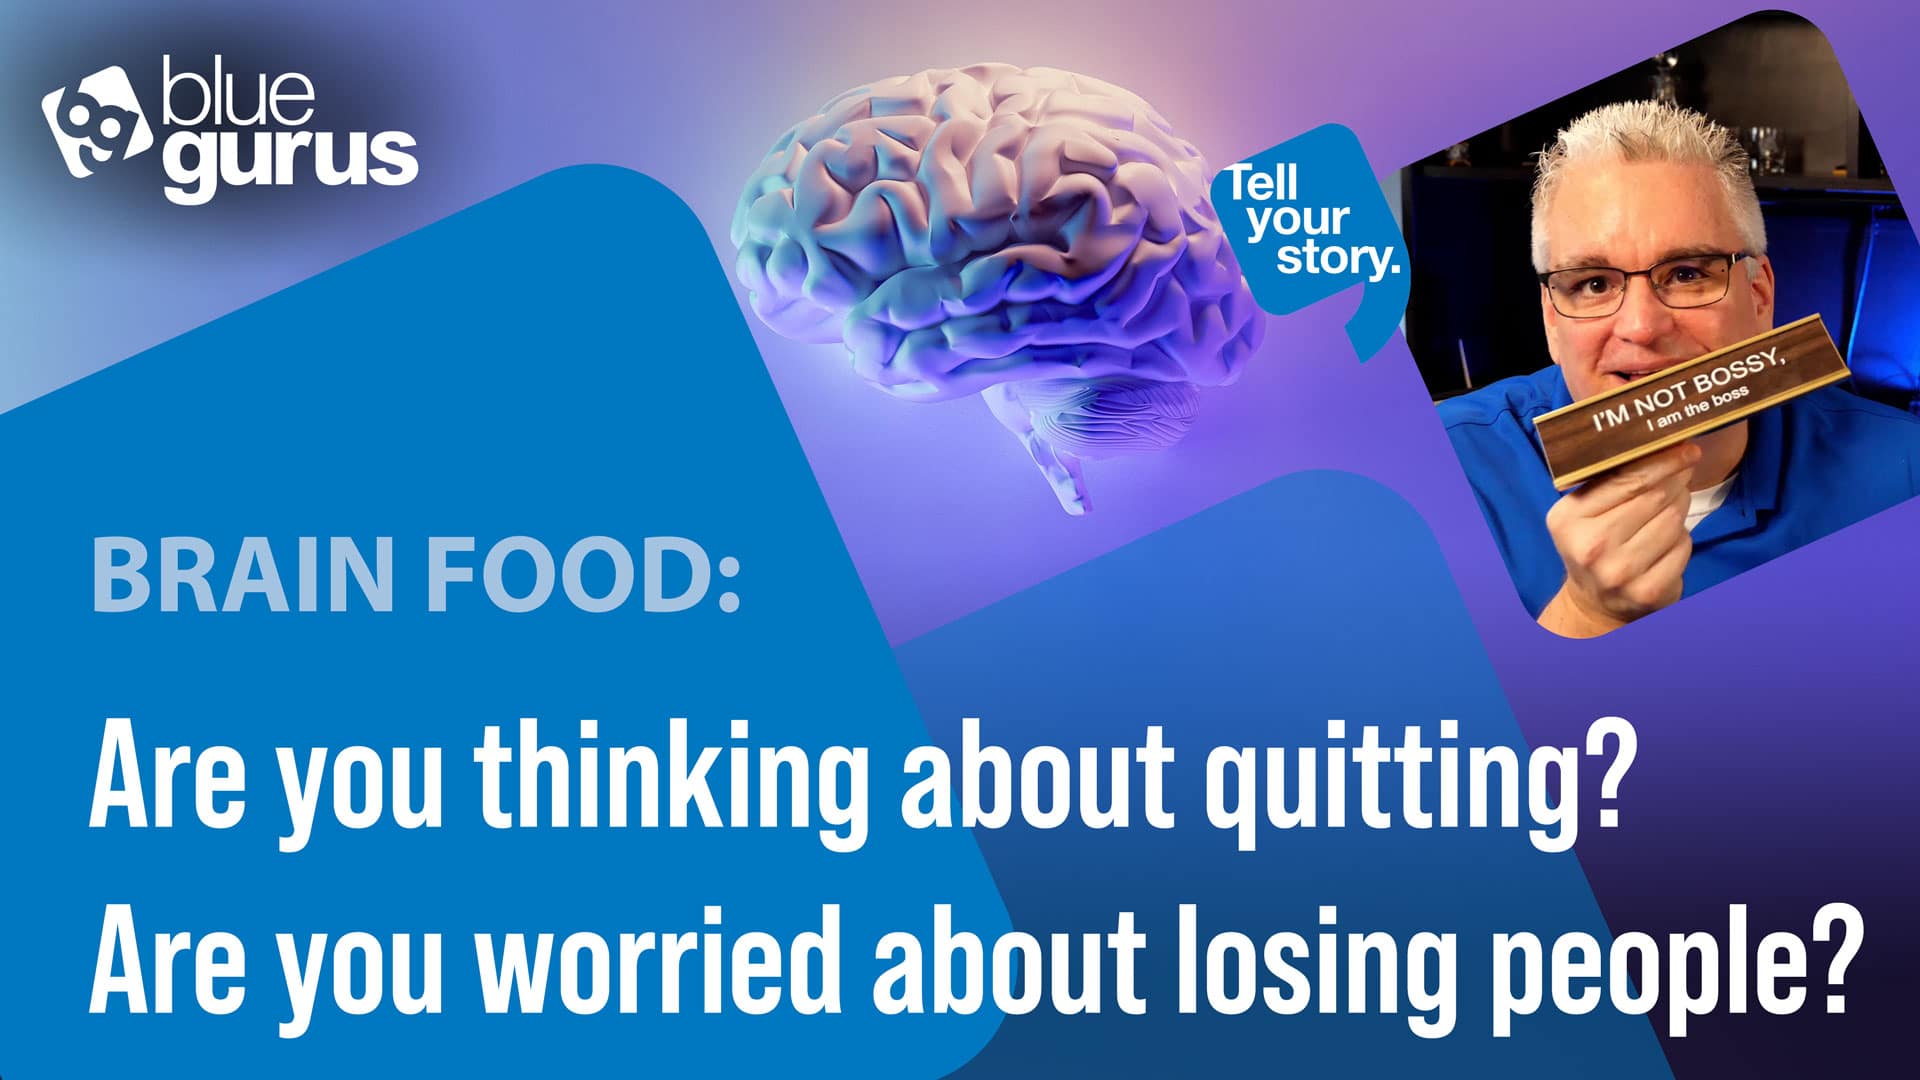 Are you thinking about quitting? Are you worried about losing people?